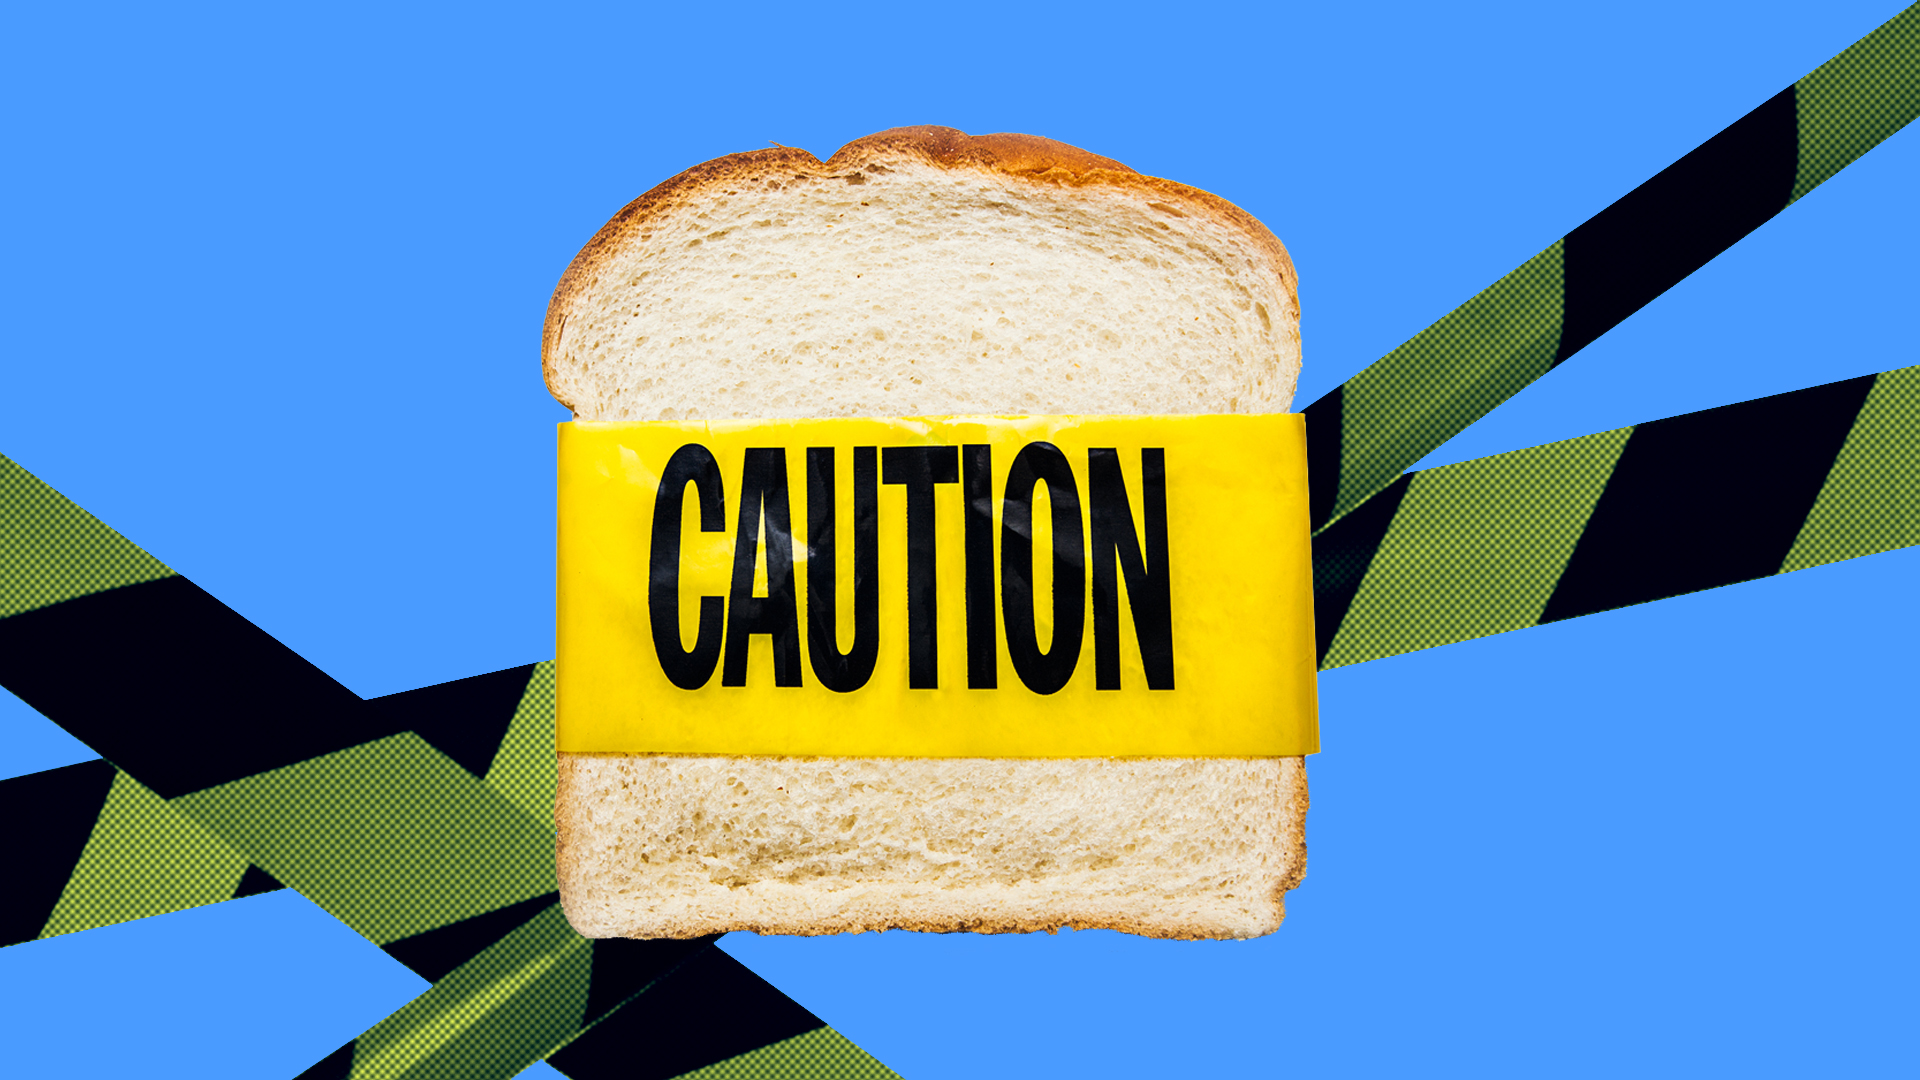 A graphic showing a slice of bread with “caution” tape around it.